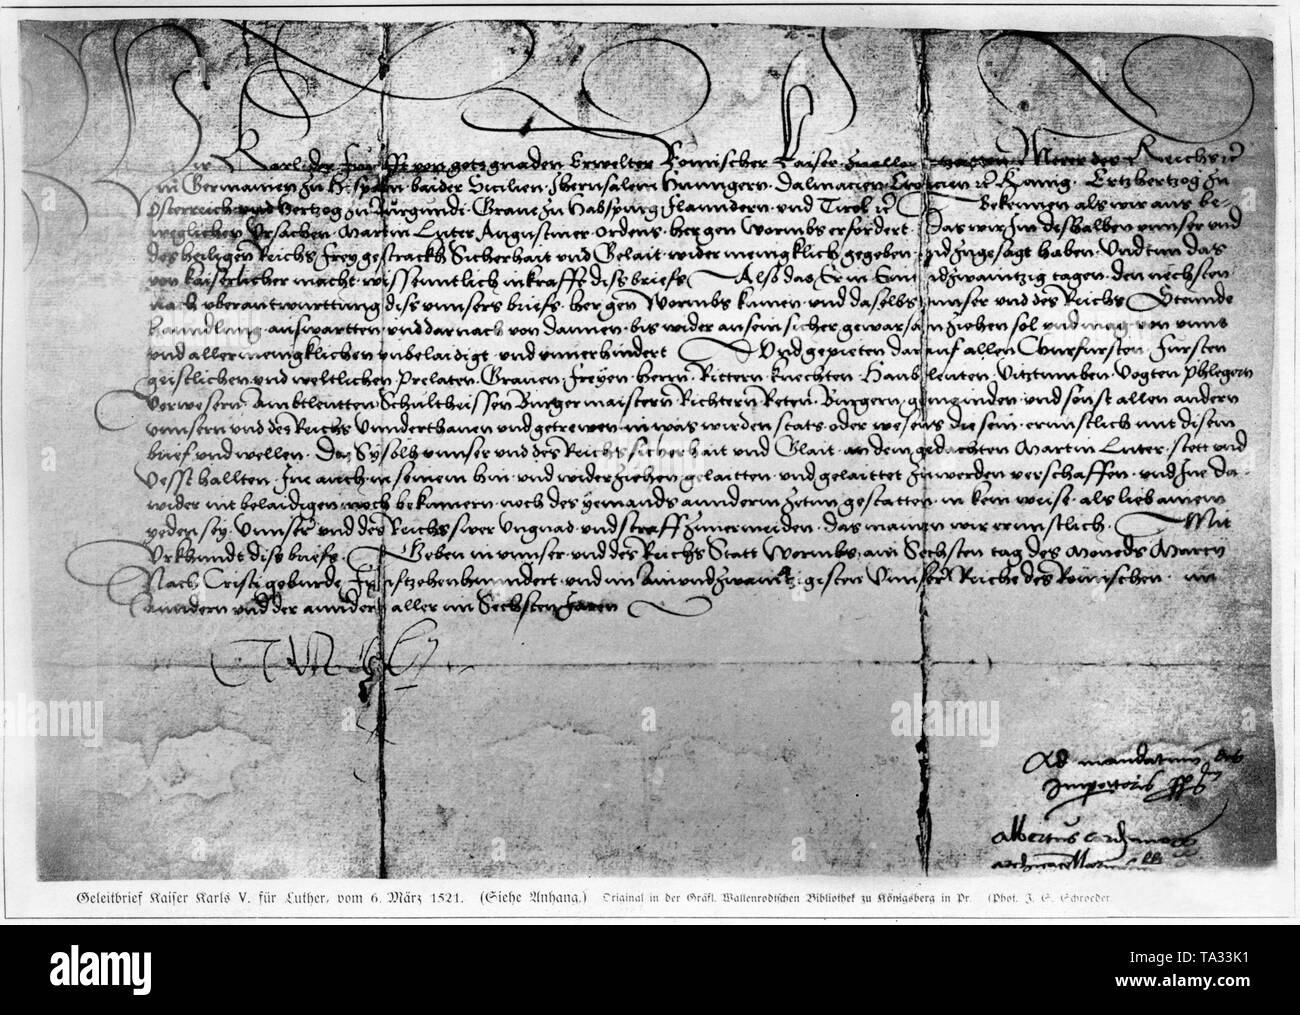 Writ of escort of Emperor Charles V from Konigsberg in Prussia (today's Kaliningrad in Russia) to Martin Luther from 6 March 1521. Stock Photo